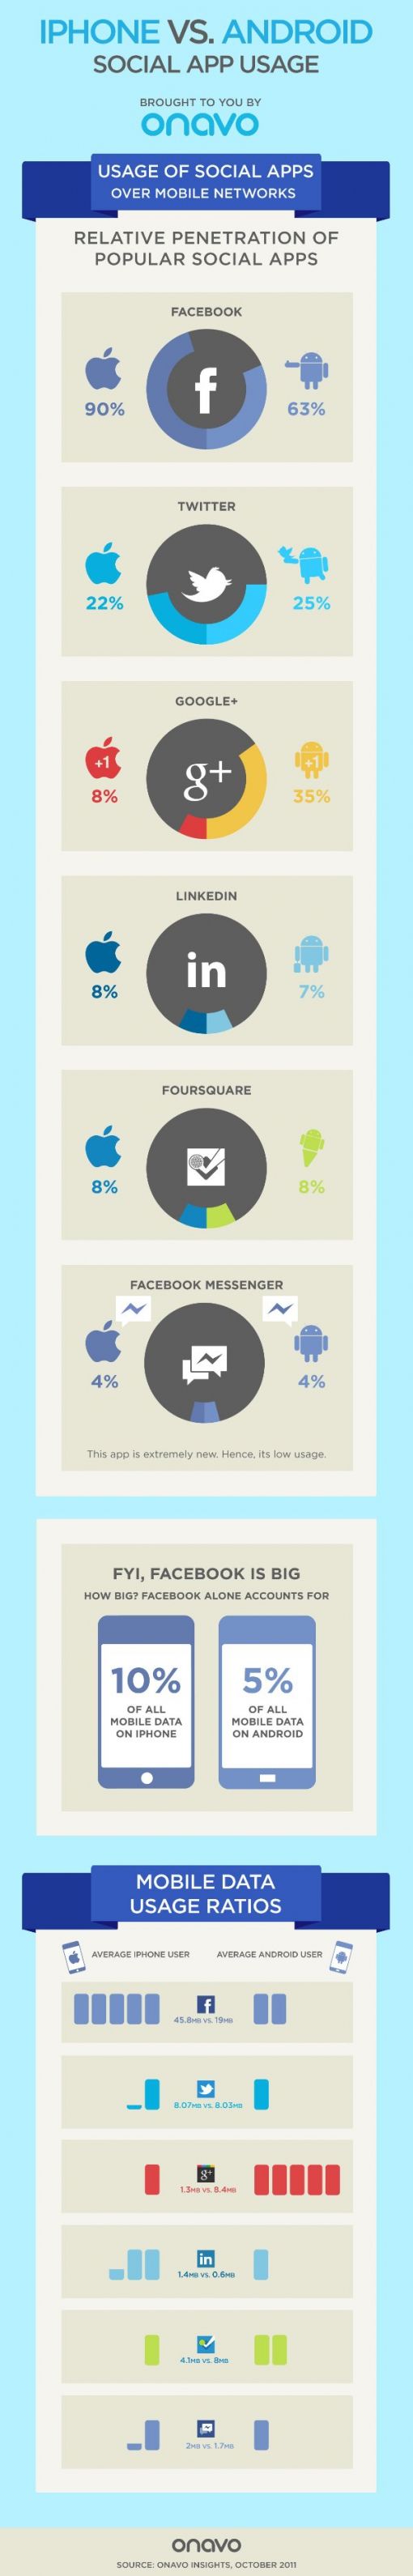 socialapps-iphone-android.jpg